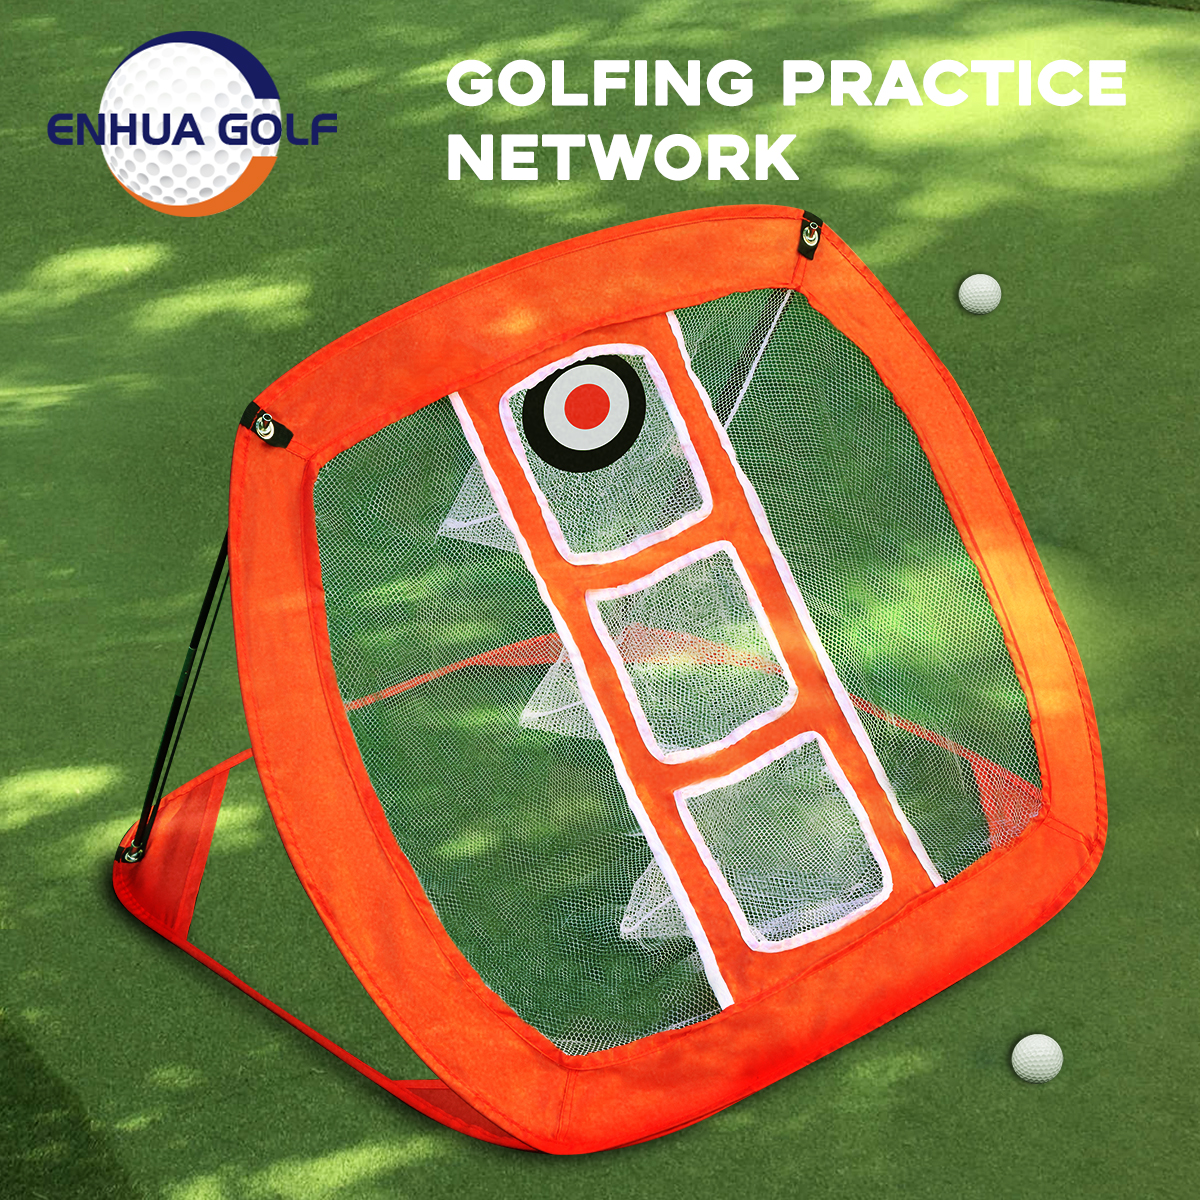 chipping practice net golf Featured Image